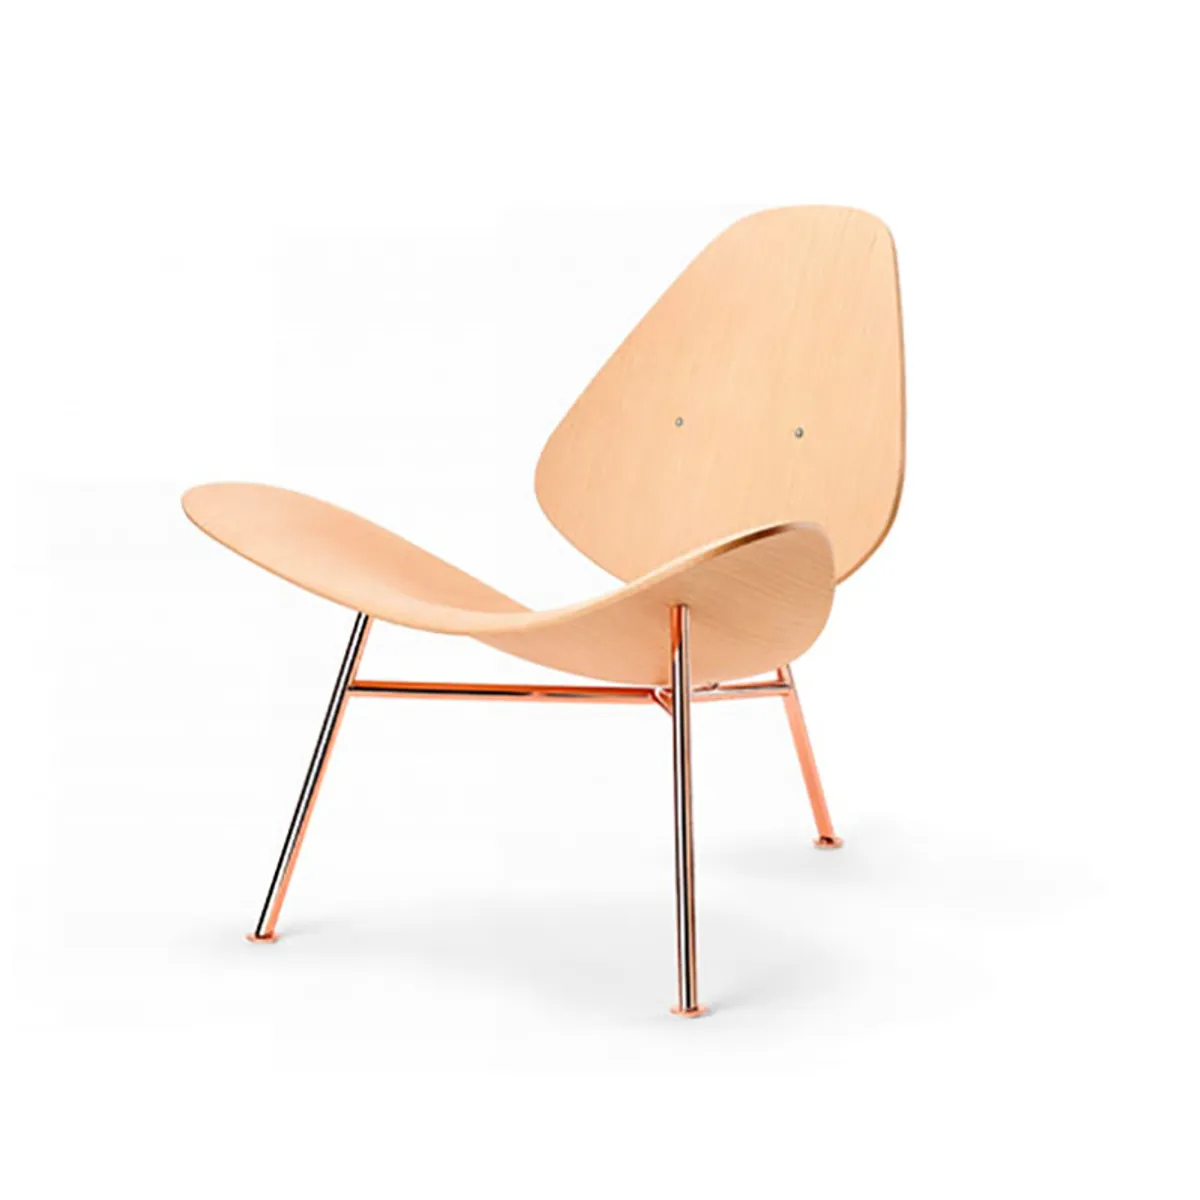 Conchilia Lounge Chair Shell Inspired Furniture With Tubular Metal Frame